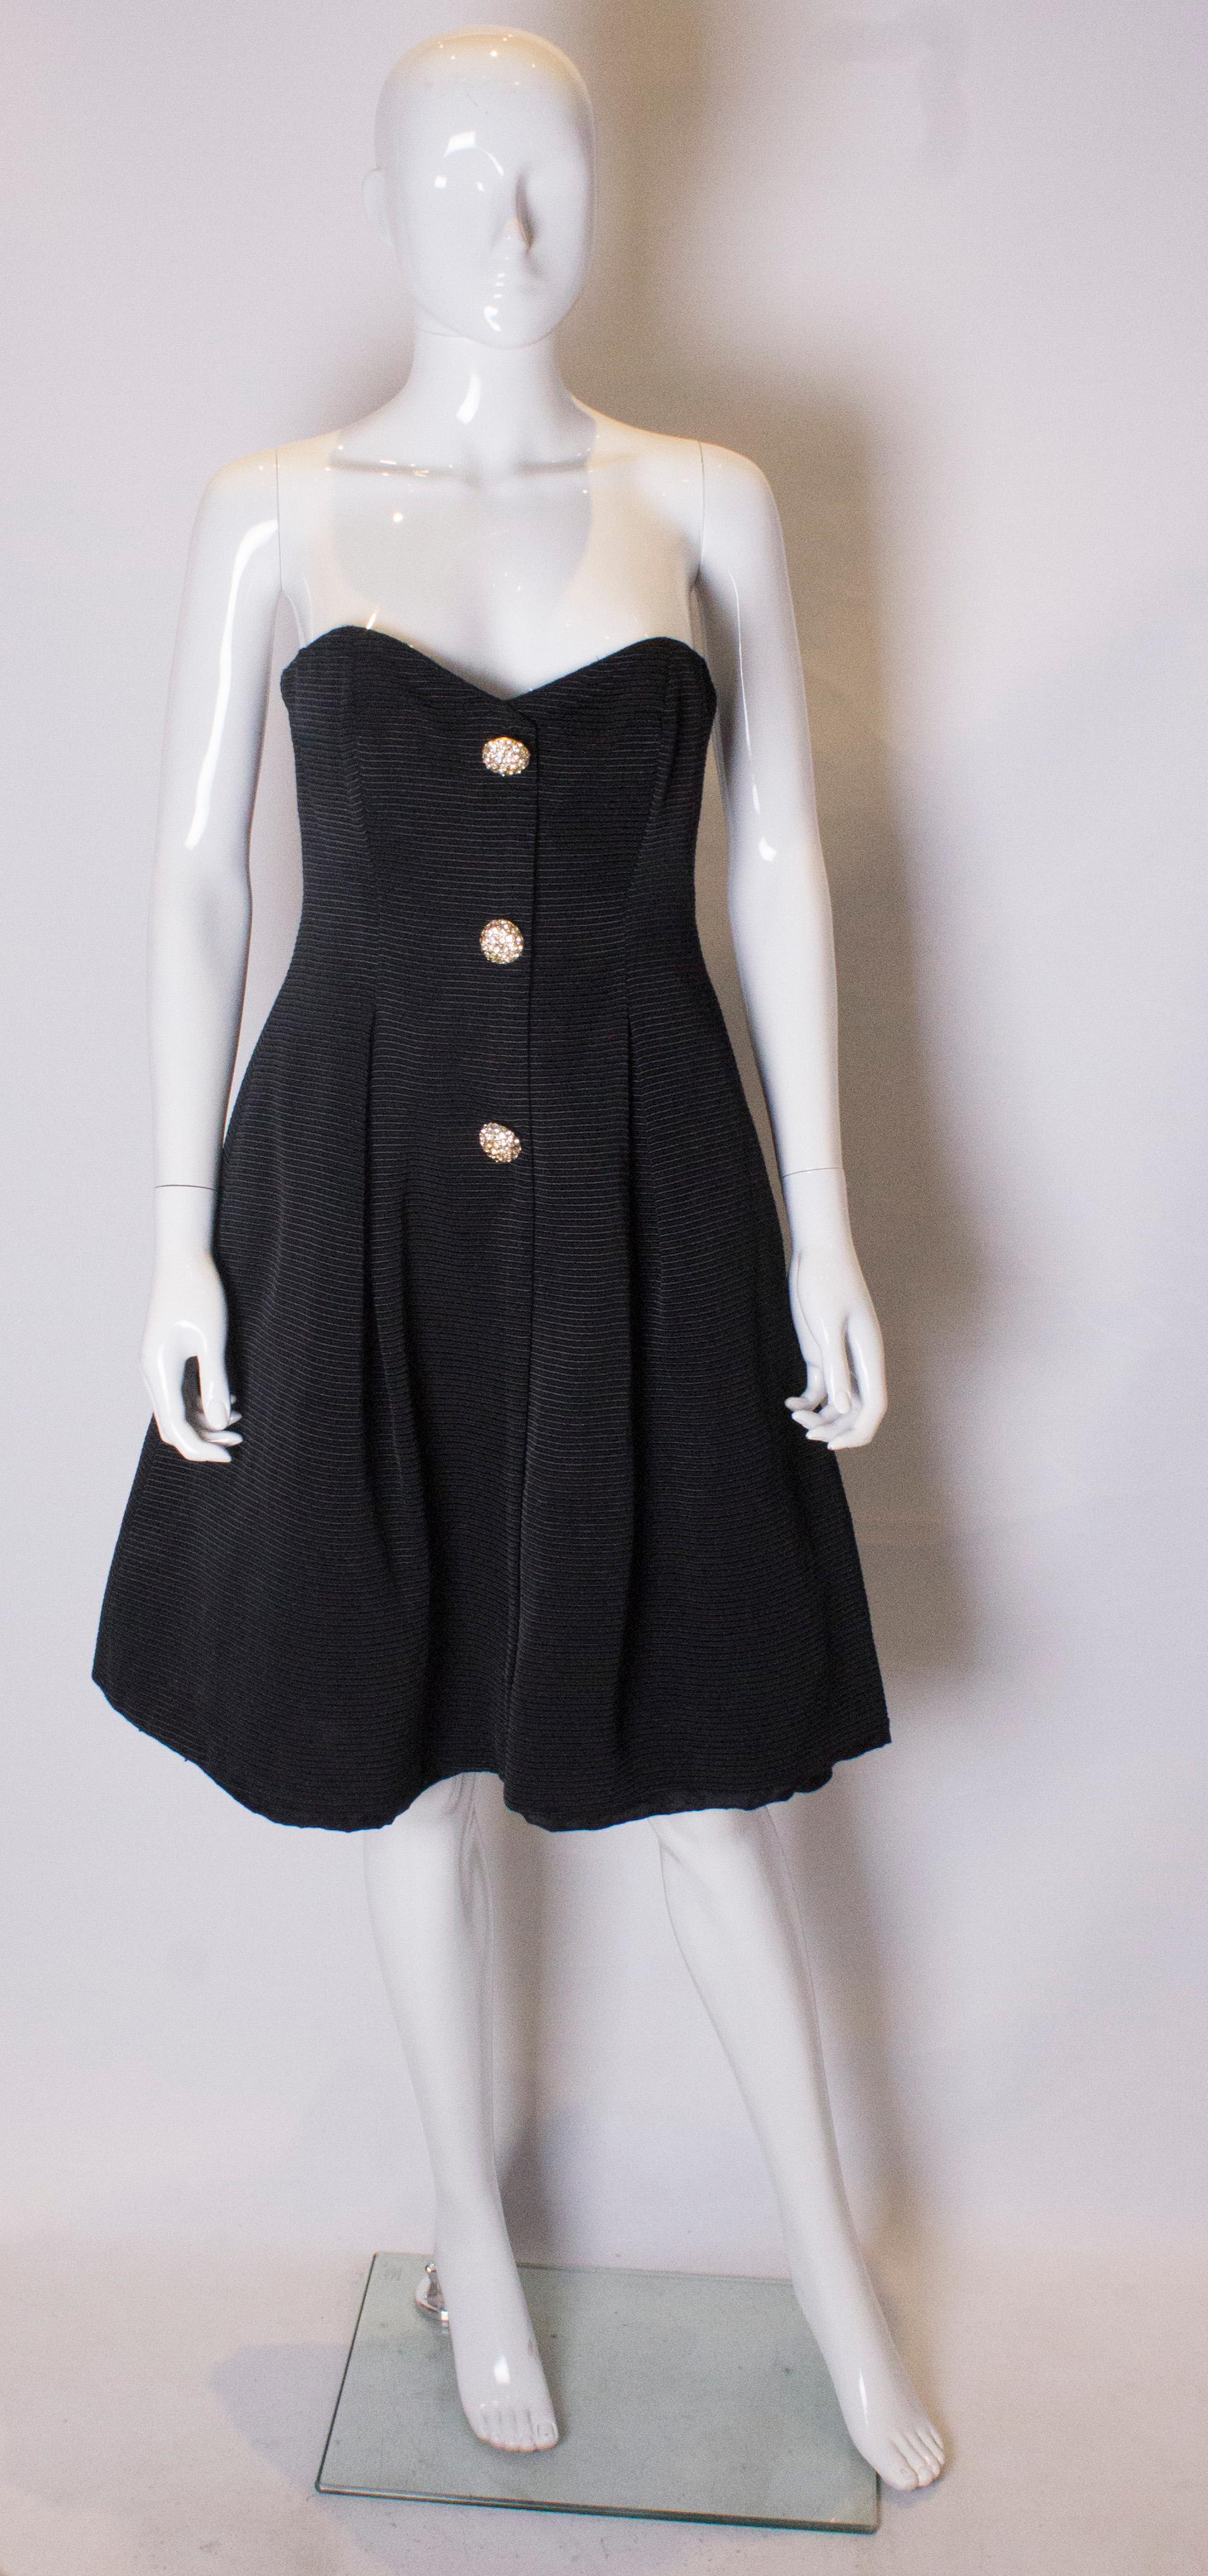 A stunning black grossgrain cocktail dress with wonderful buttons and matching shrug.  The dress is strapless with a central back zip , full net underskirt and is fully lined. The shrug has a shawl collar and cleverly connects over the buttons at